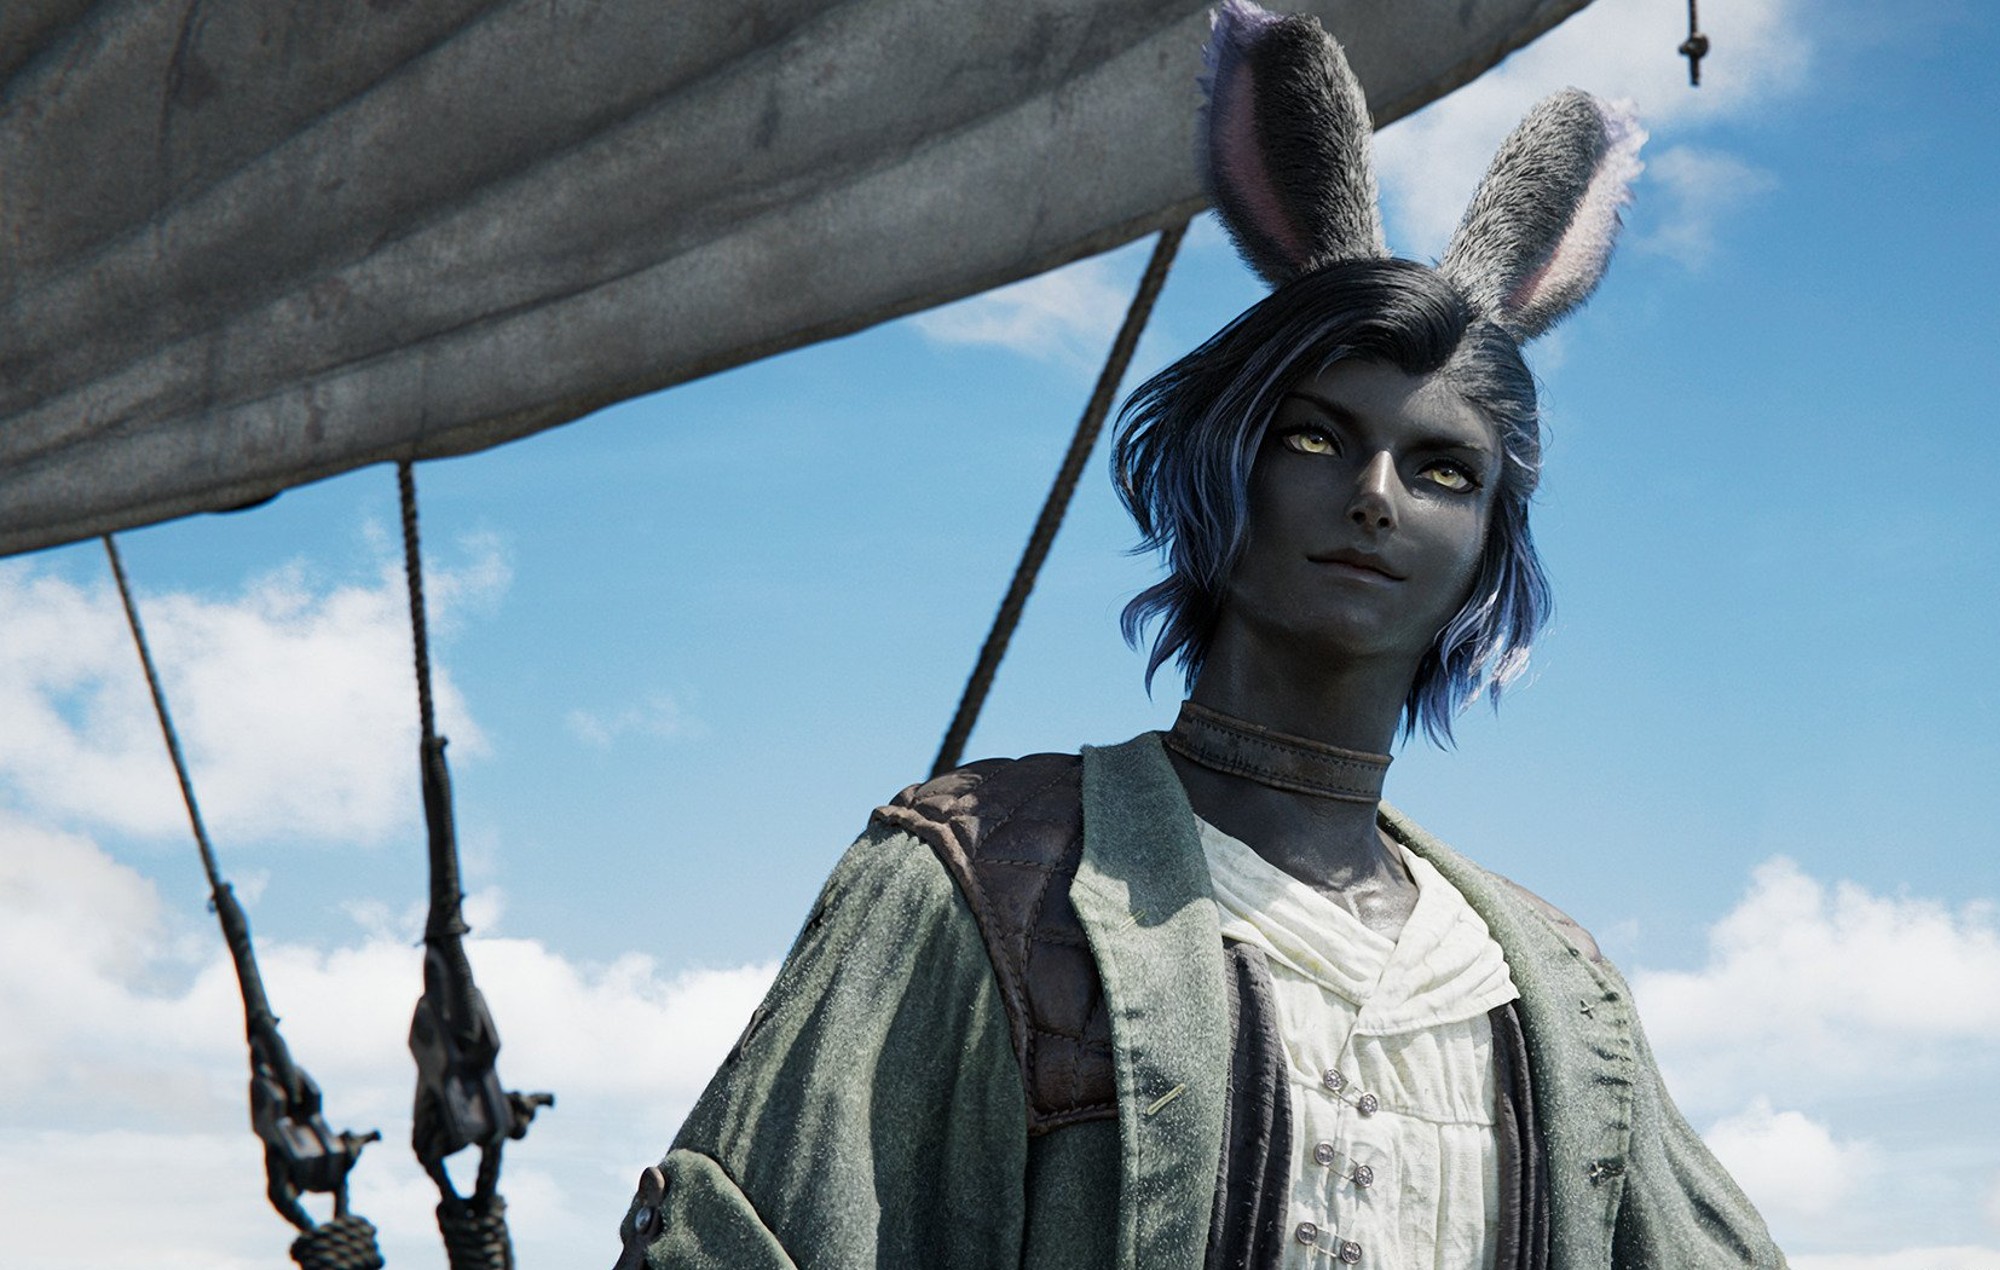 ‘Final Fantasy 14’ will add harder achievements if one specific player wants them